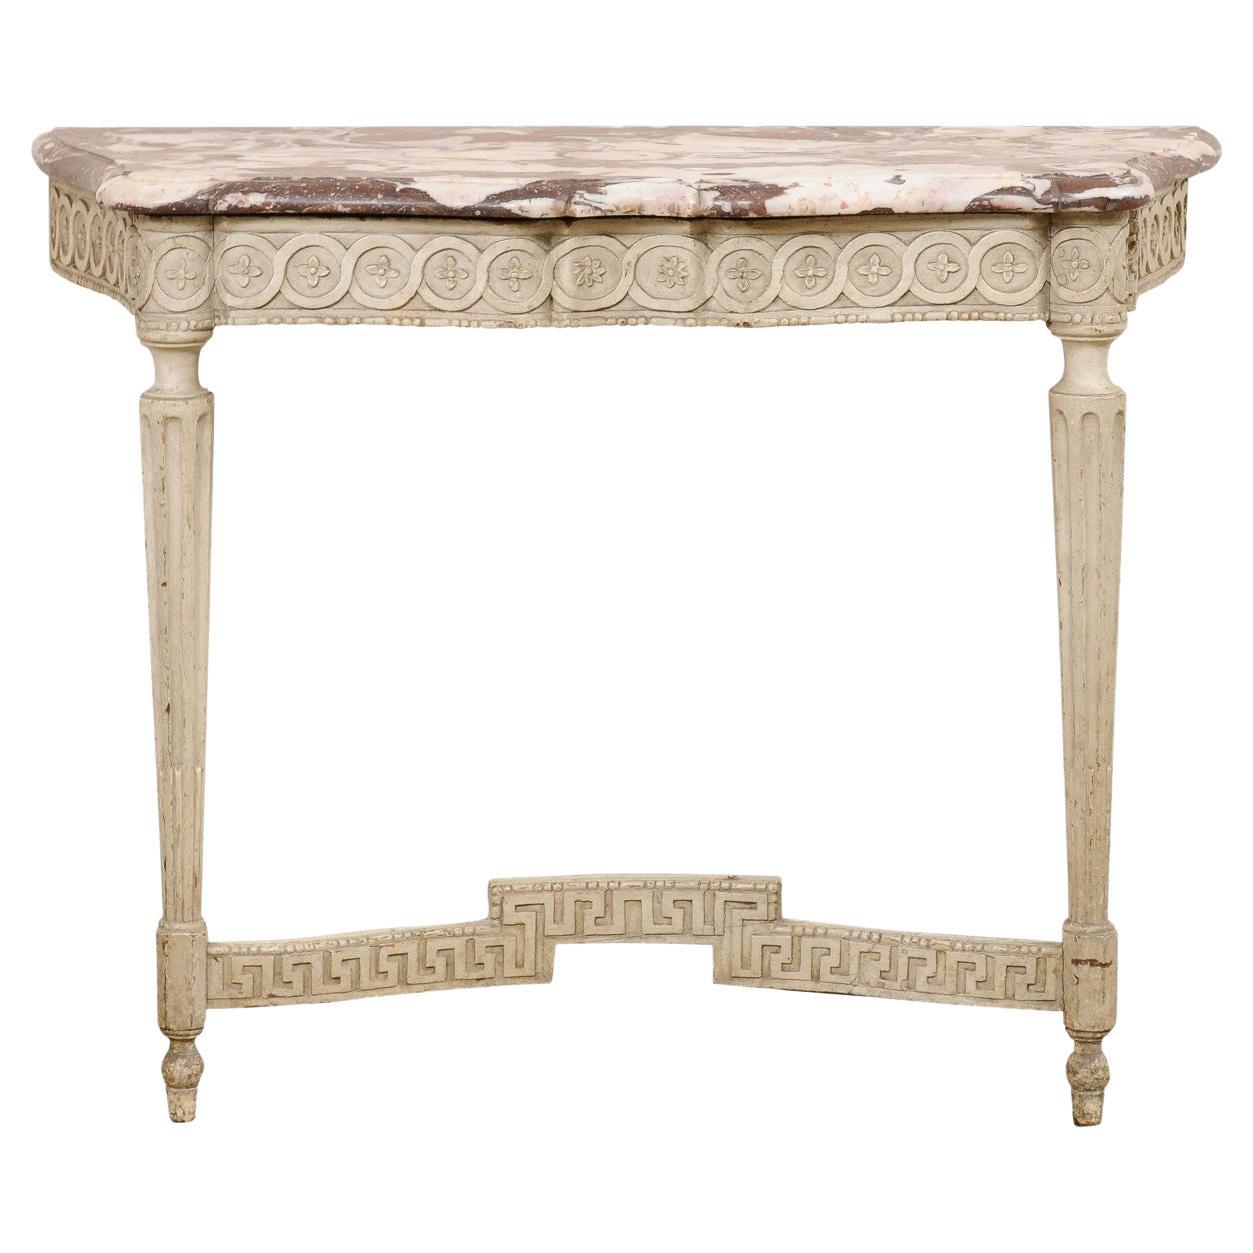 Elegant 18th C. French Marble Top Wall Console, Nicely Carved w/Original Finish